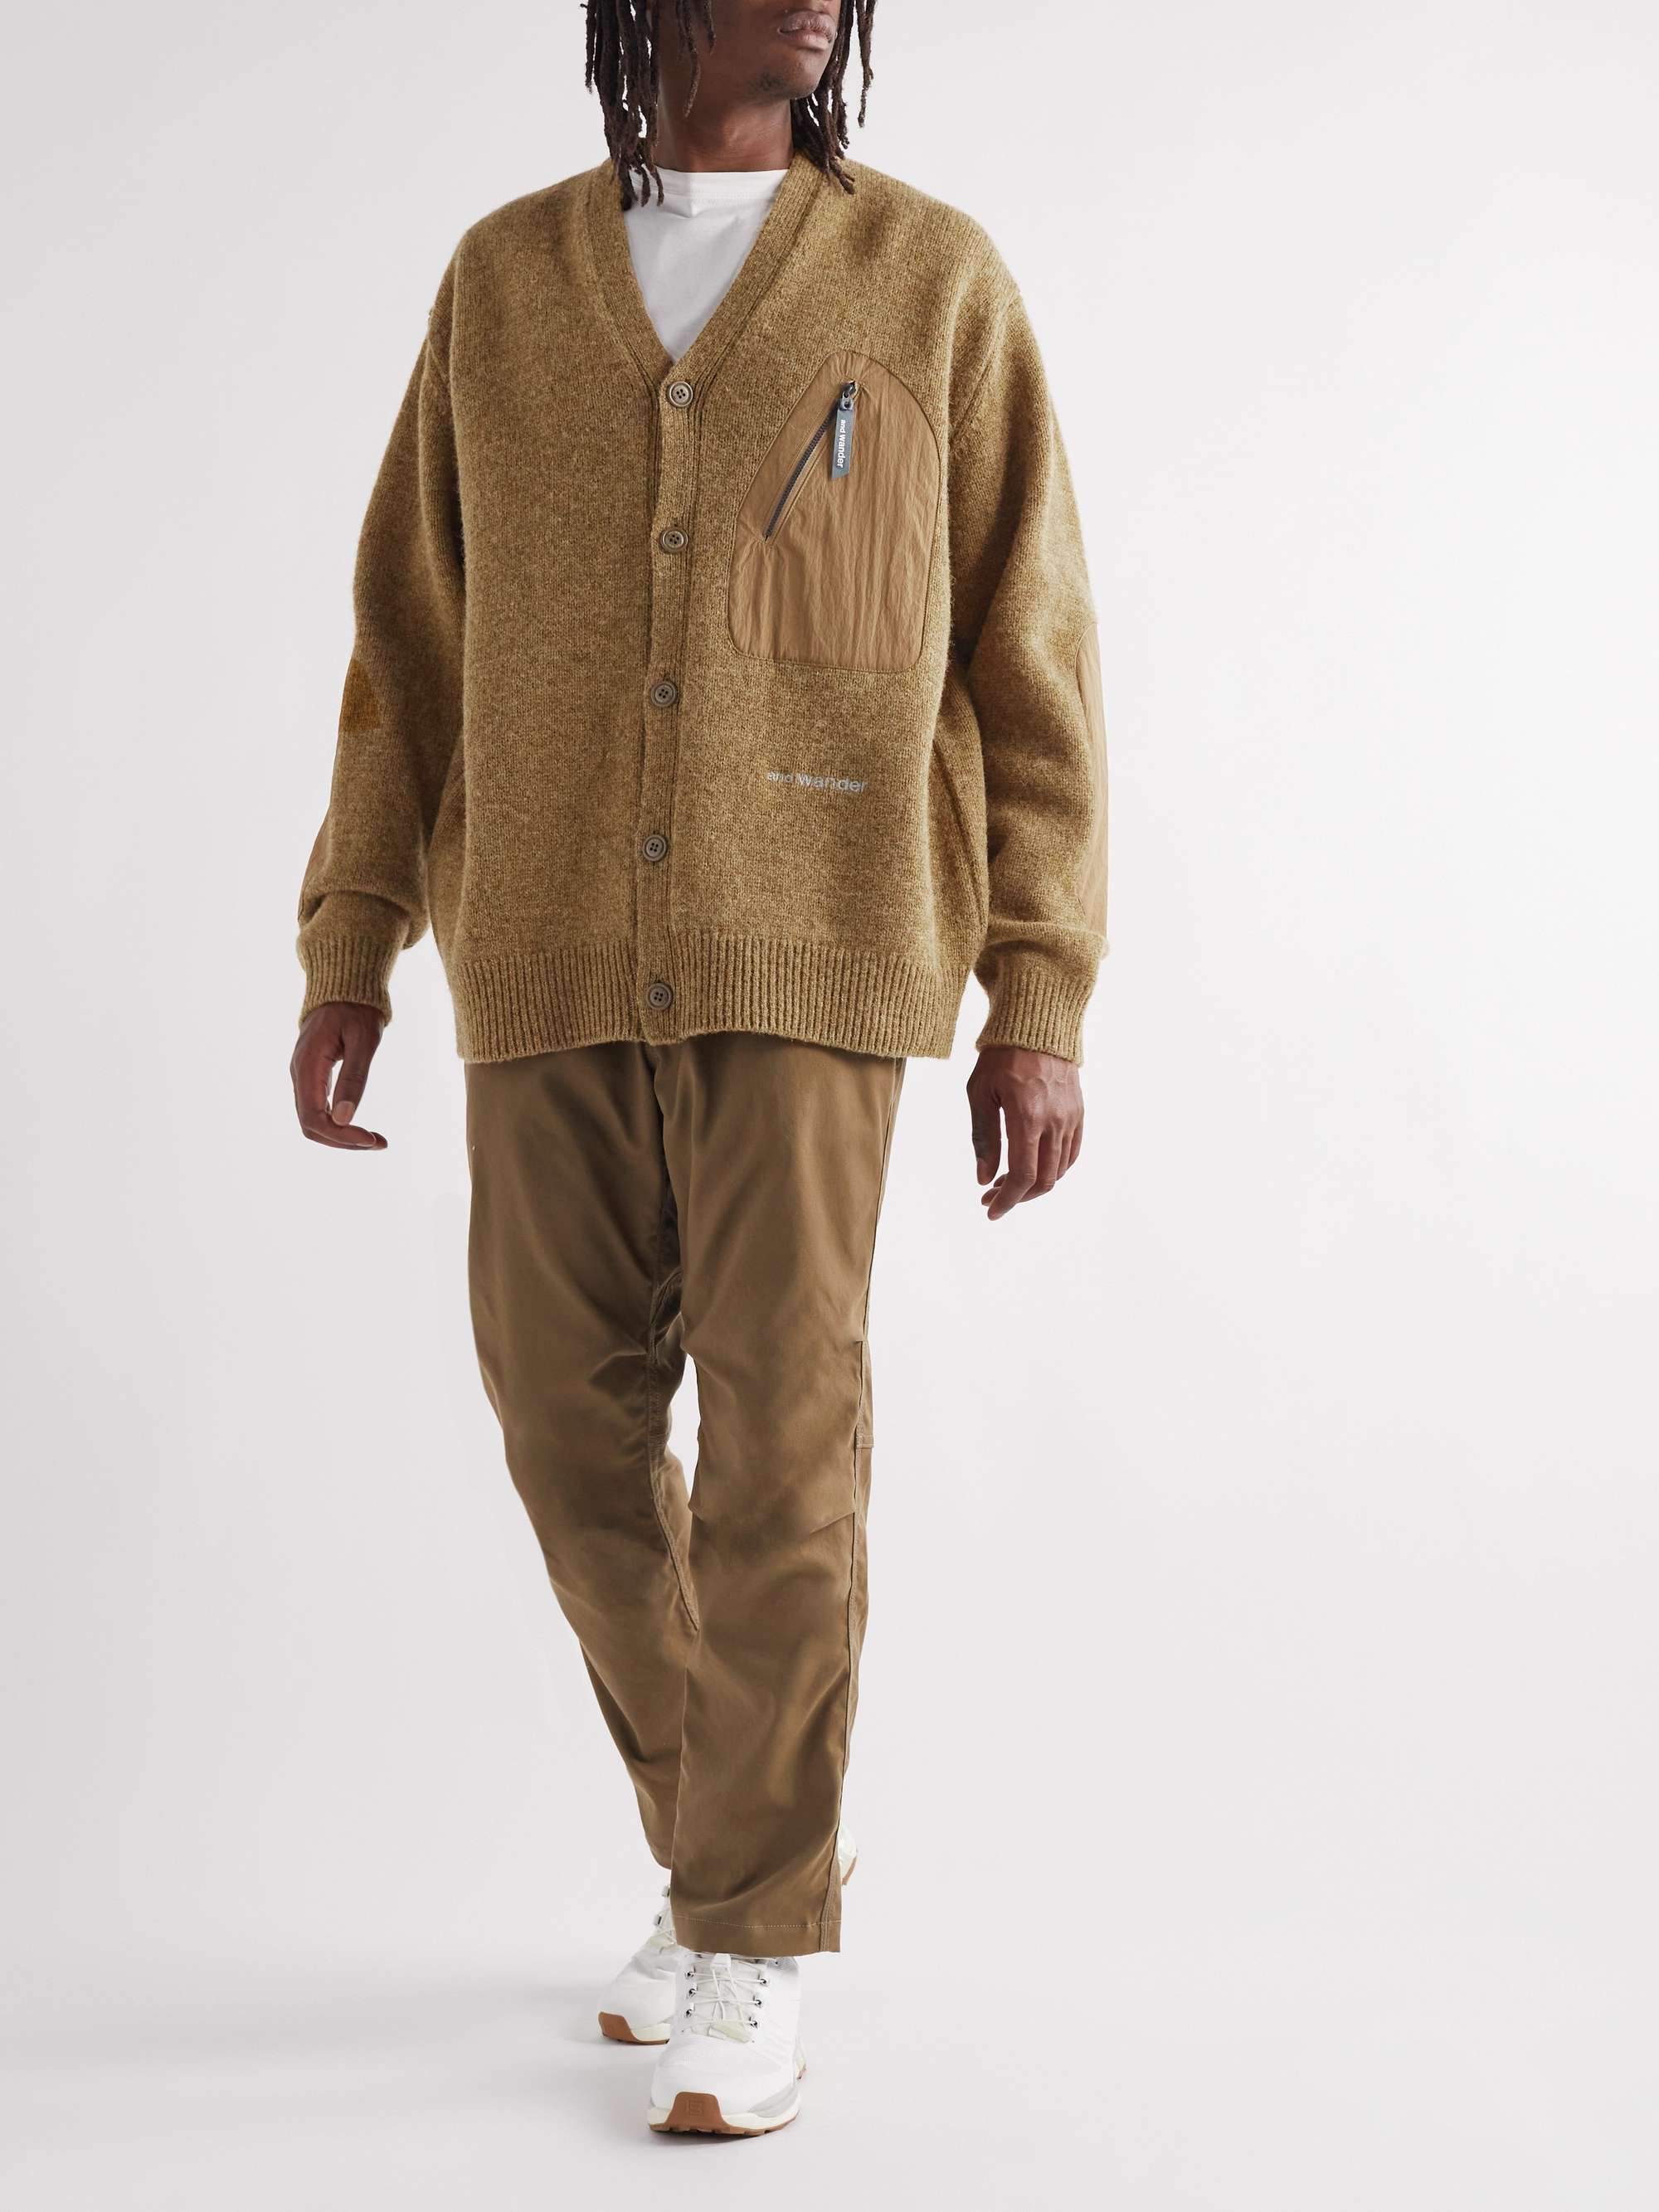 AND WANDER Logo-Embroidered Shell-Trimmed Shetland Wool Cardigan